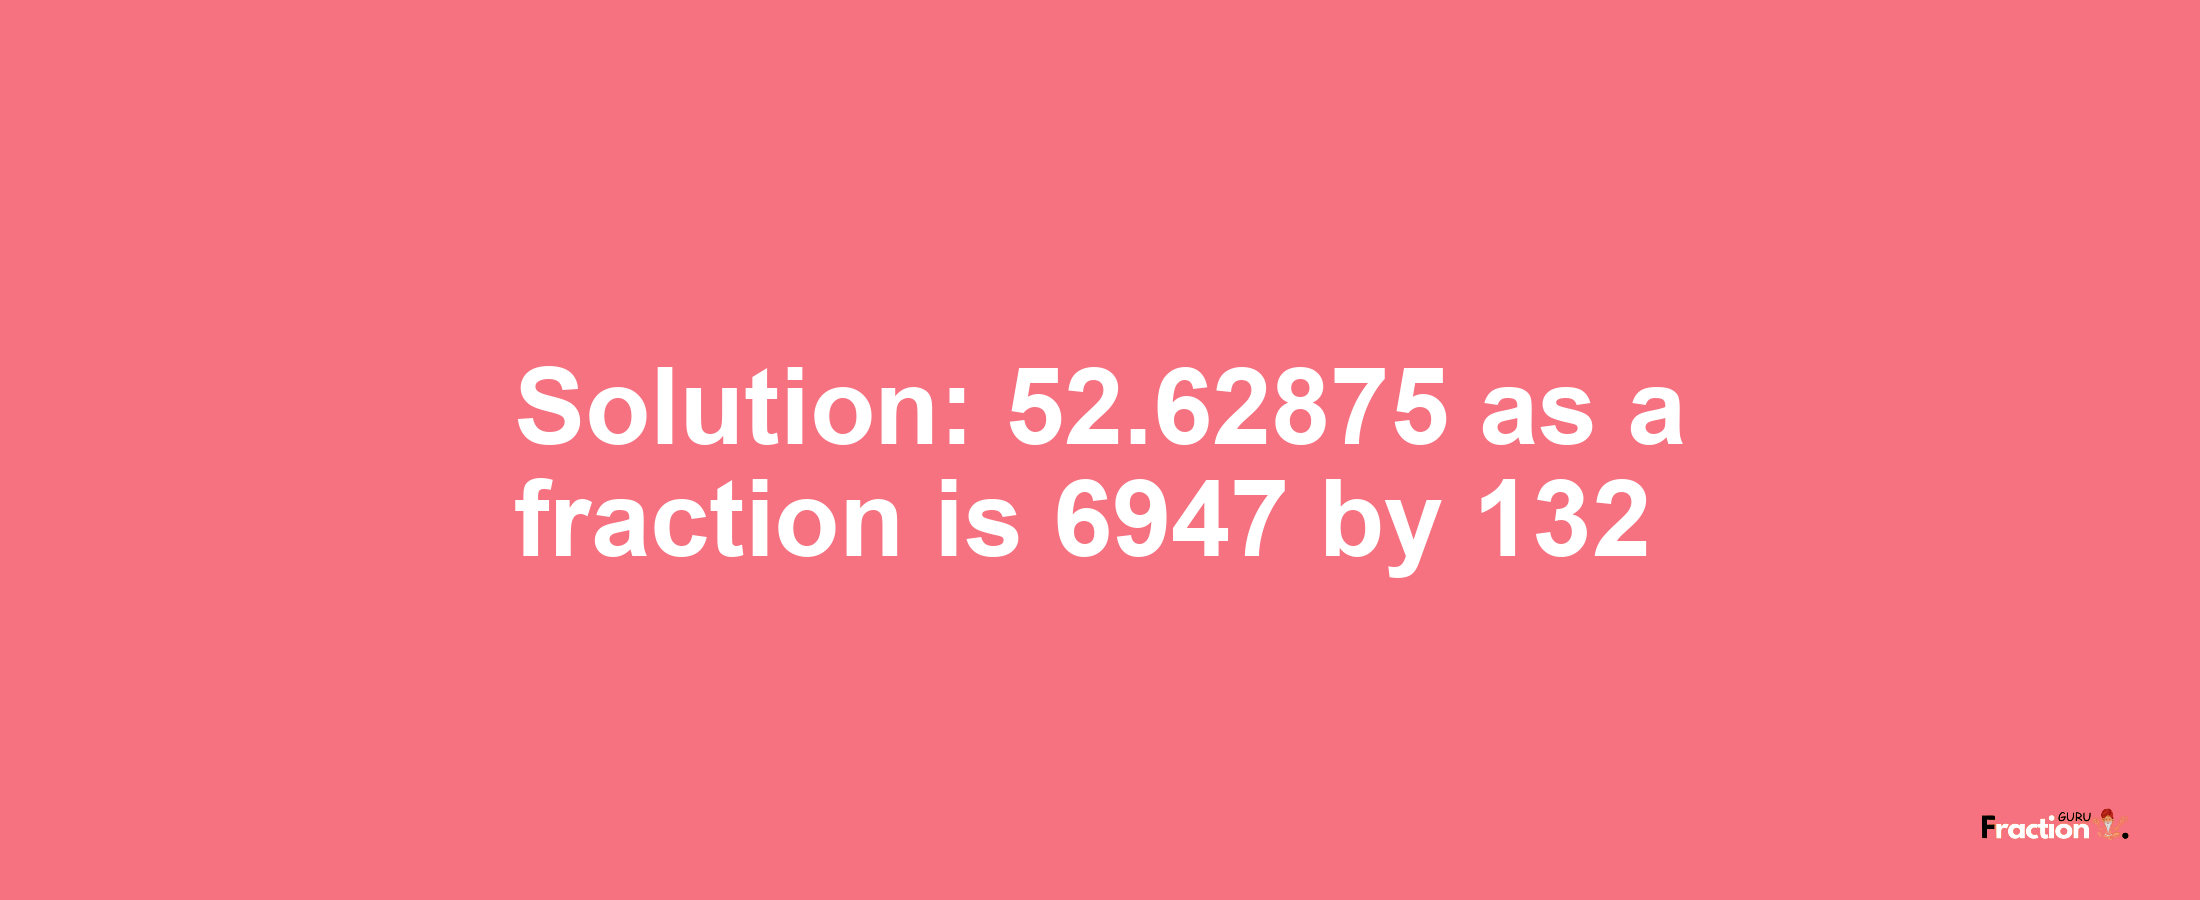 Solution:52.62875 as a fraction is 6947/132